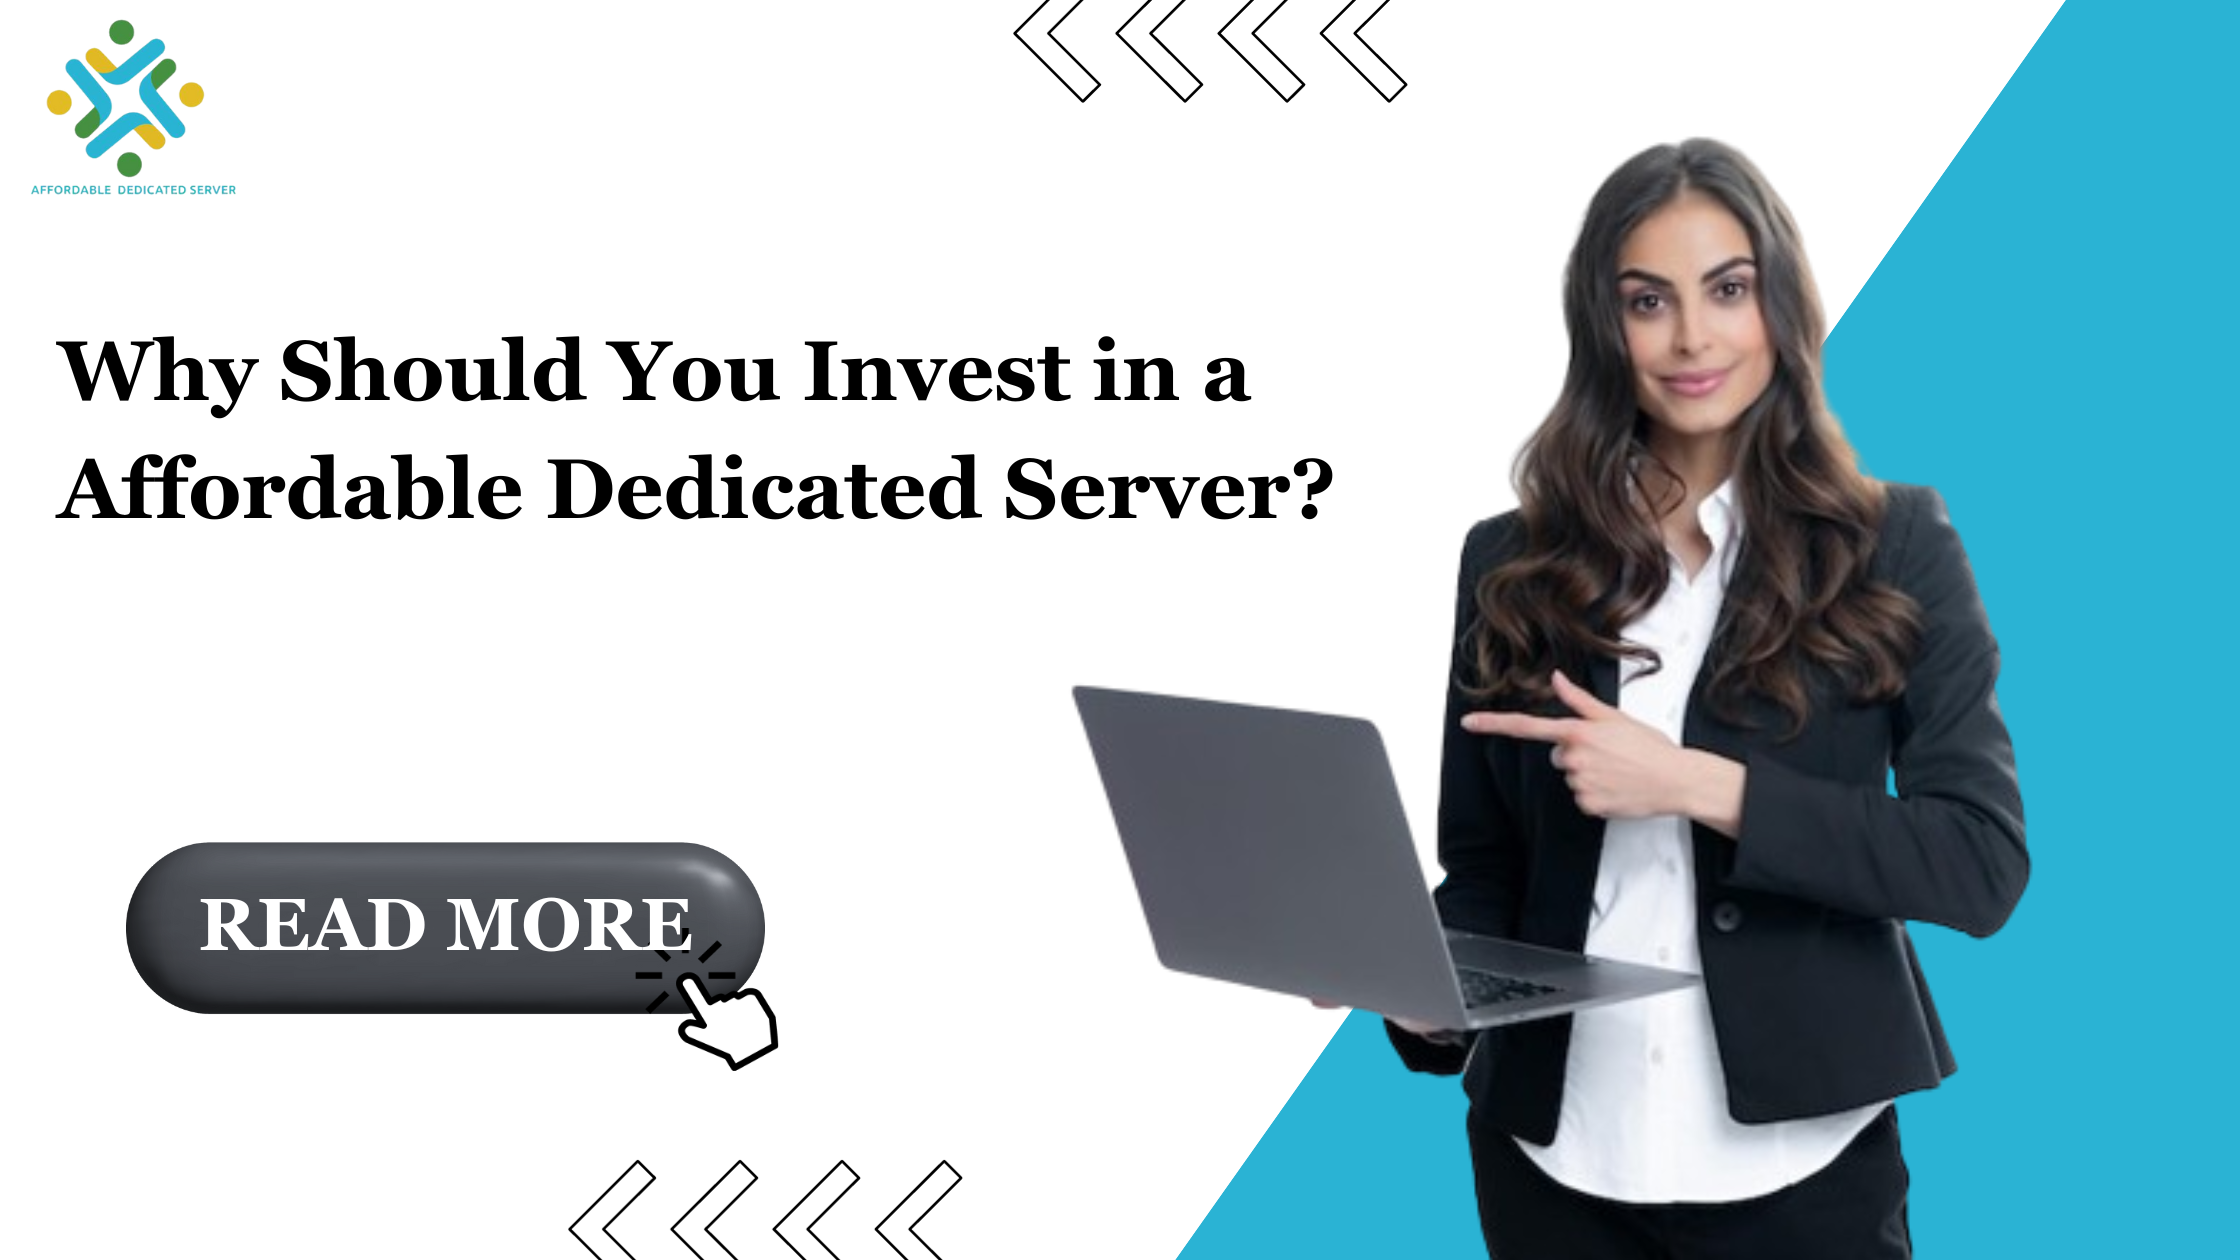 Why Should You Invest in a Affordable Dedicated Server